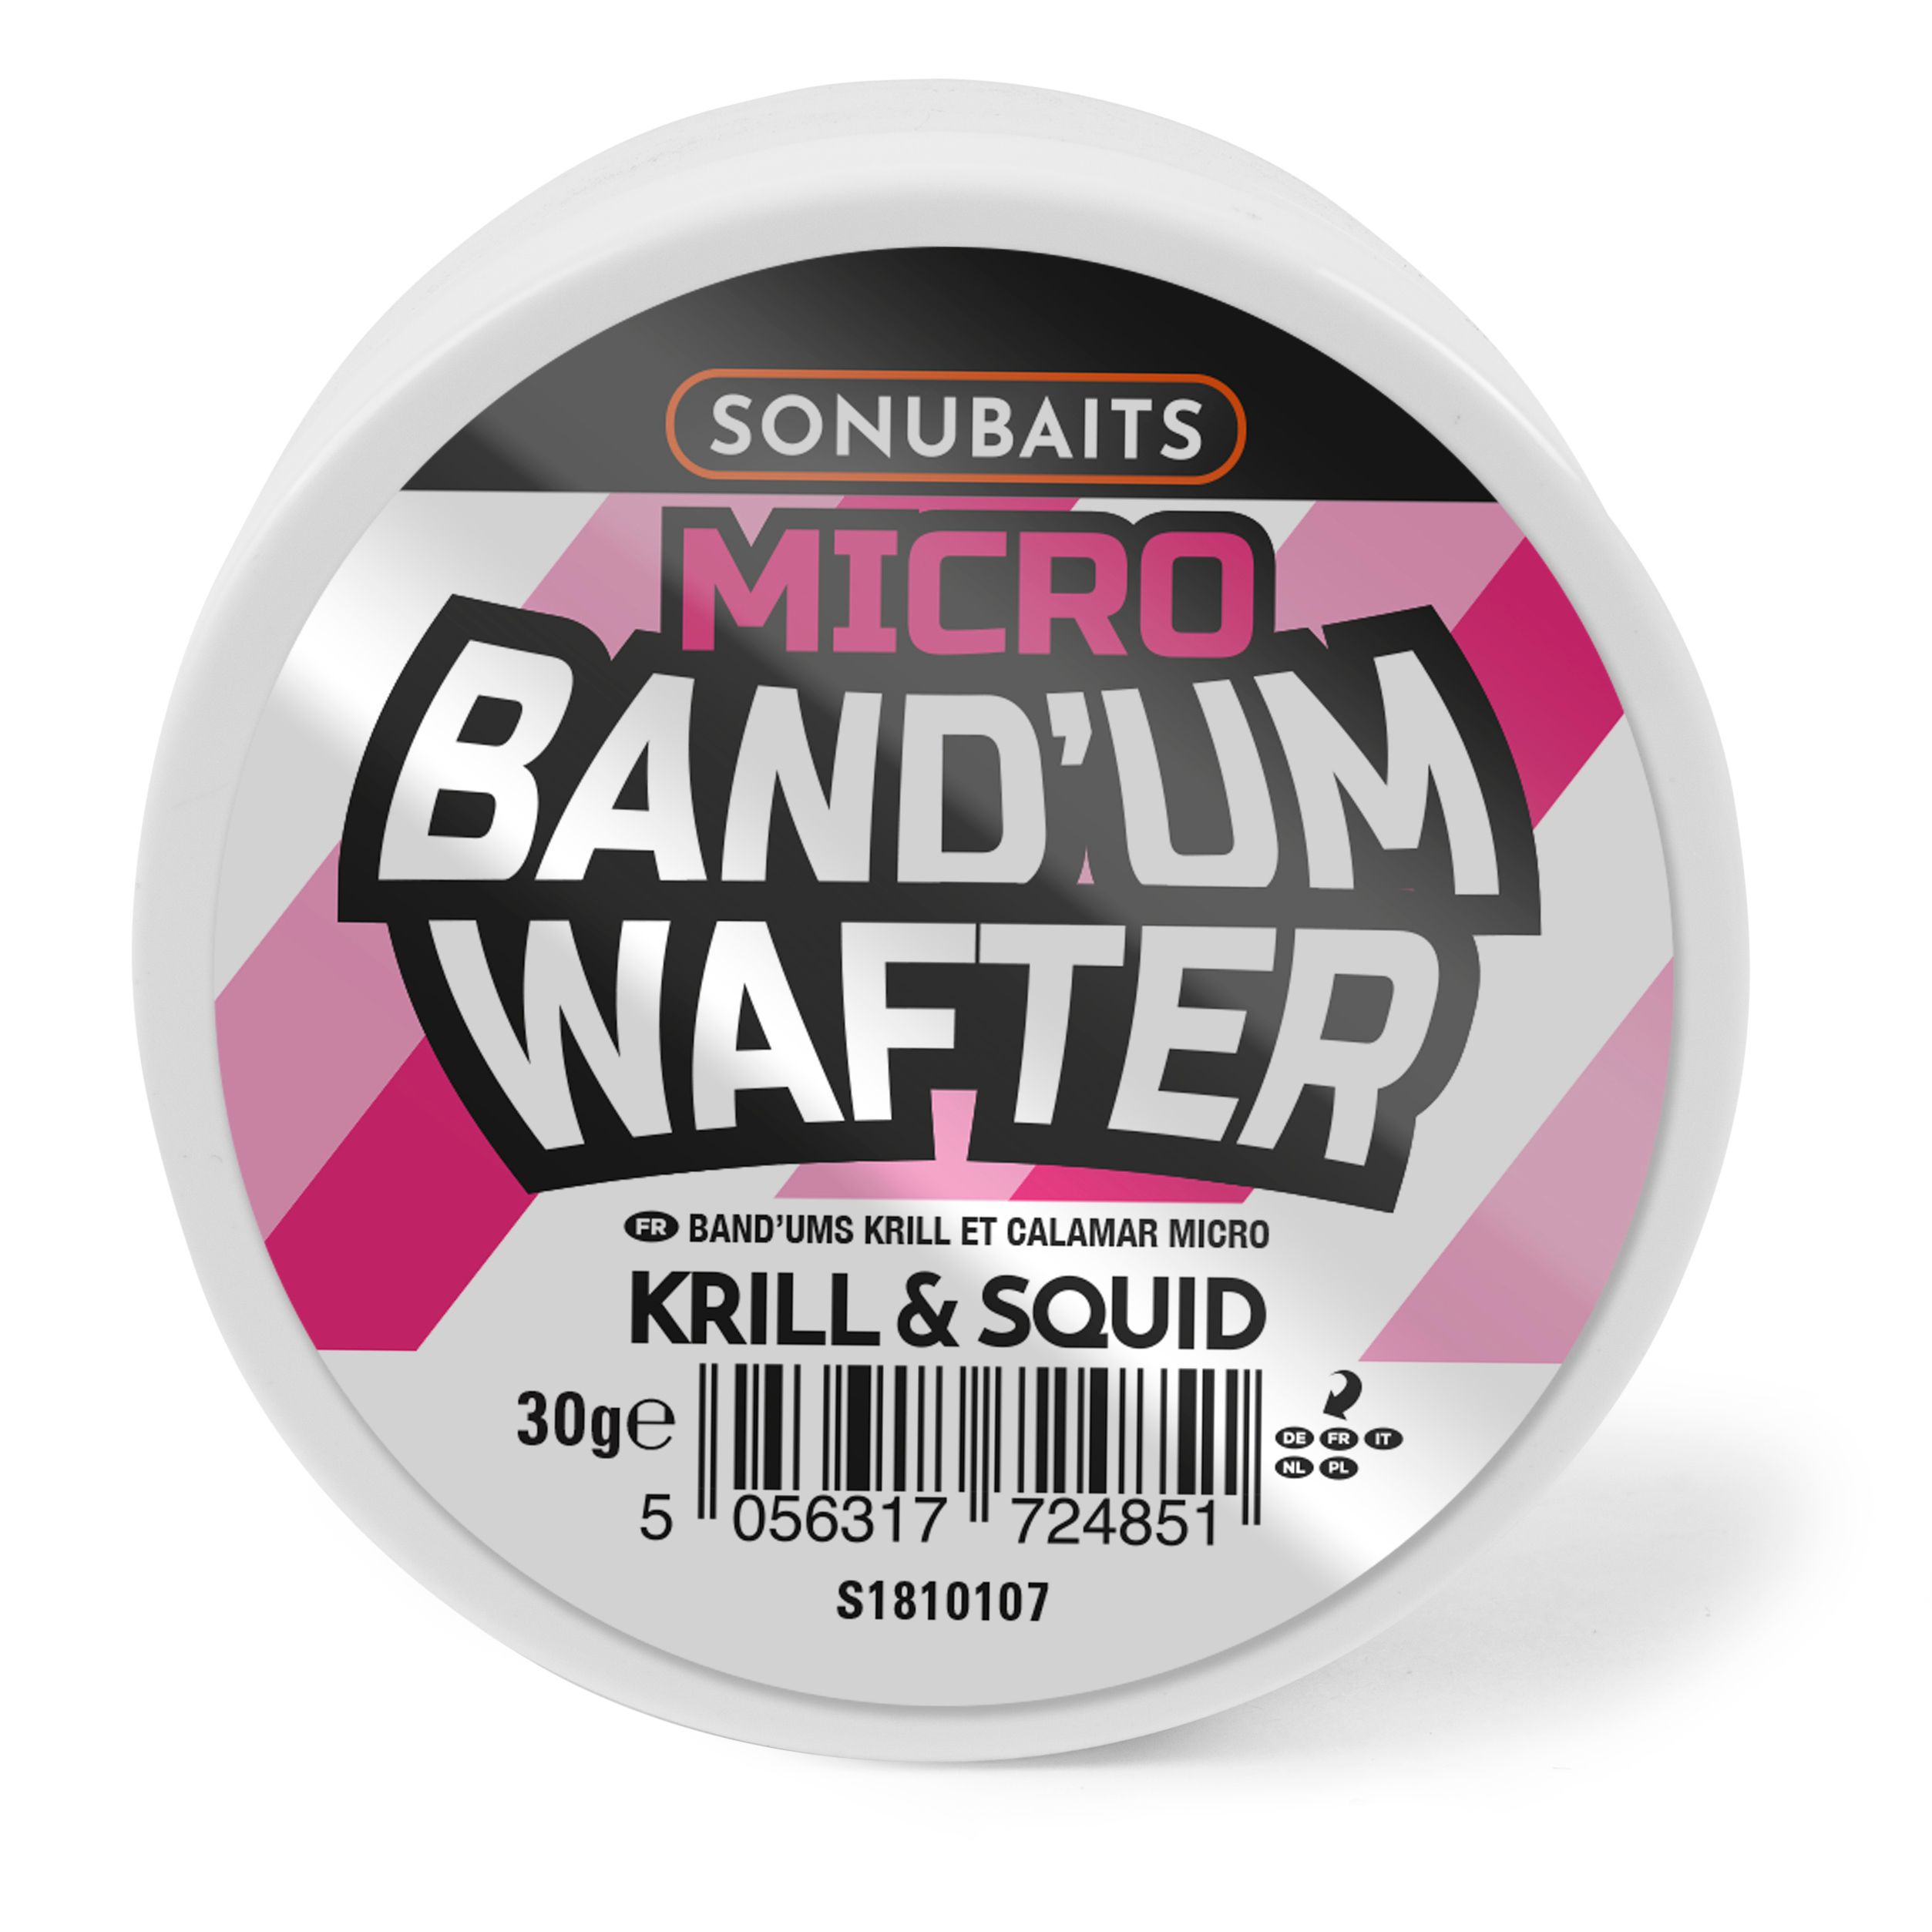 Sonubaits Micro Band'Um Wafter Krill & Squid